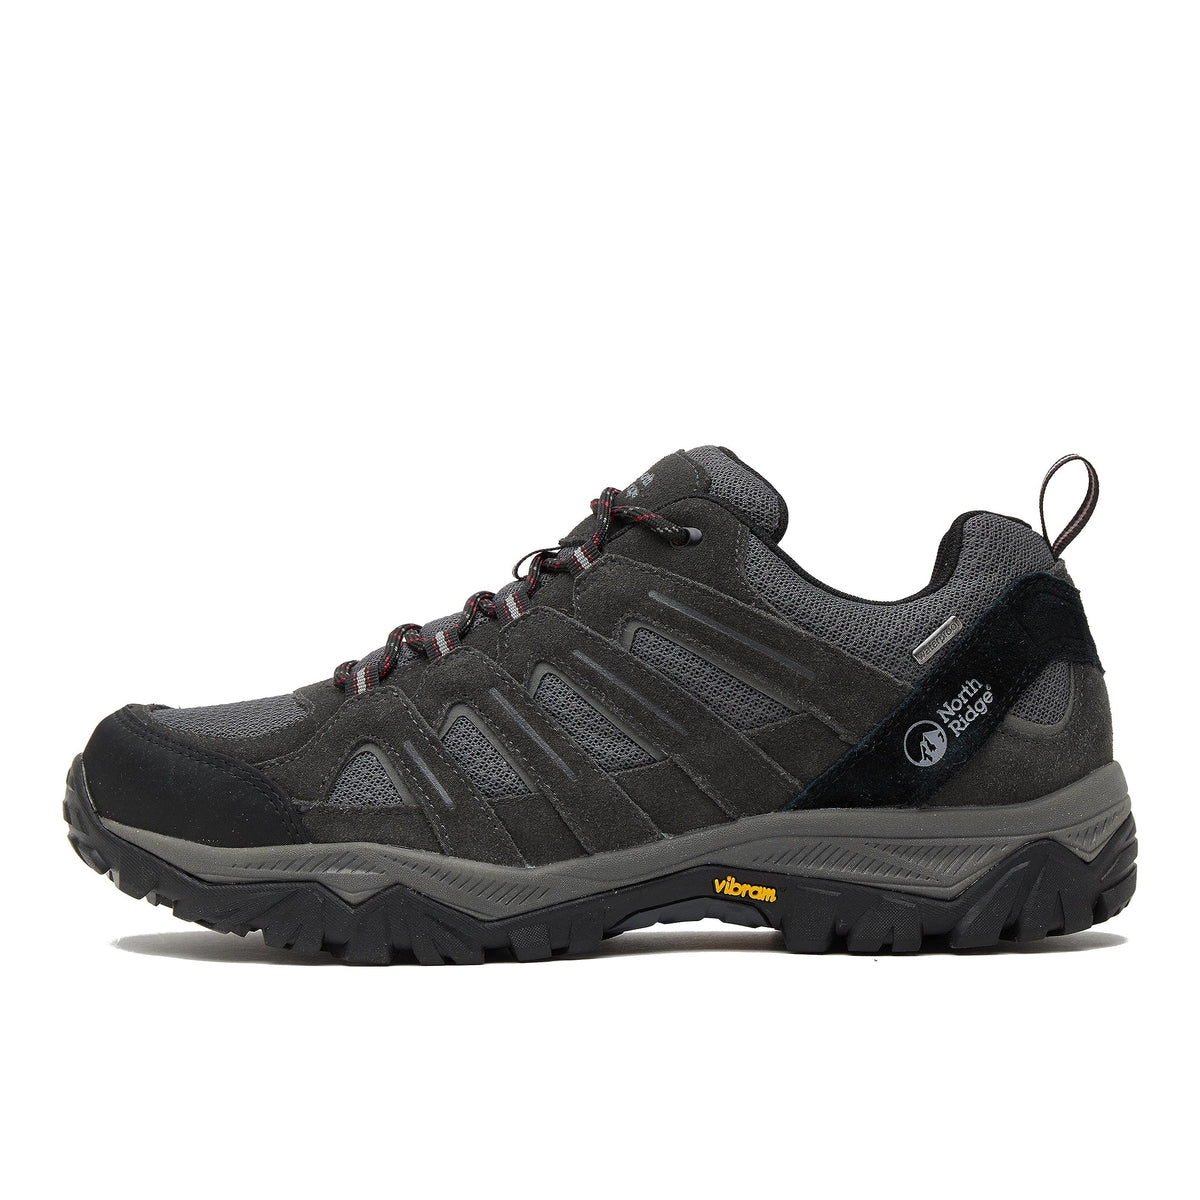 NORTH RIDGE Menâ€™s Kielder 2 Waterproof and Breathable Leather Walking Shoes with a Vibram Outsole, Men's Hiking Shoes (Black, Numeric_8)